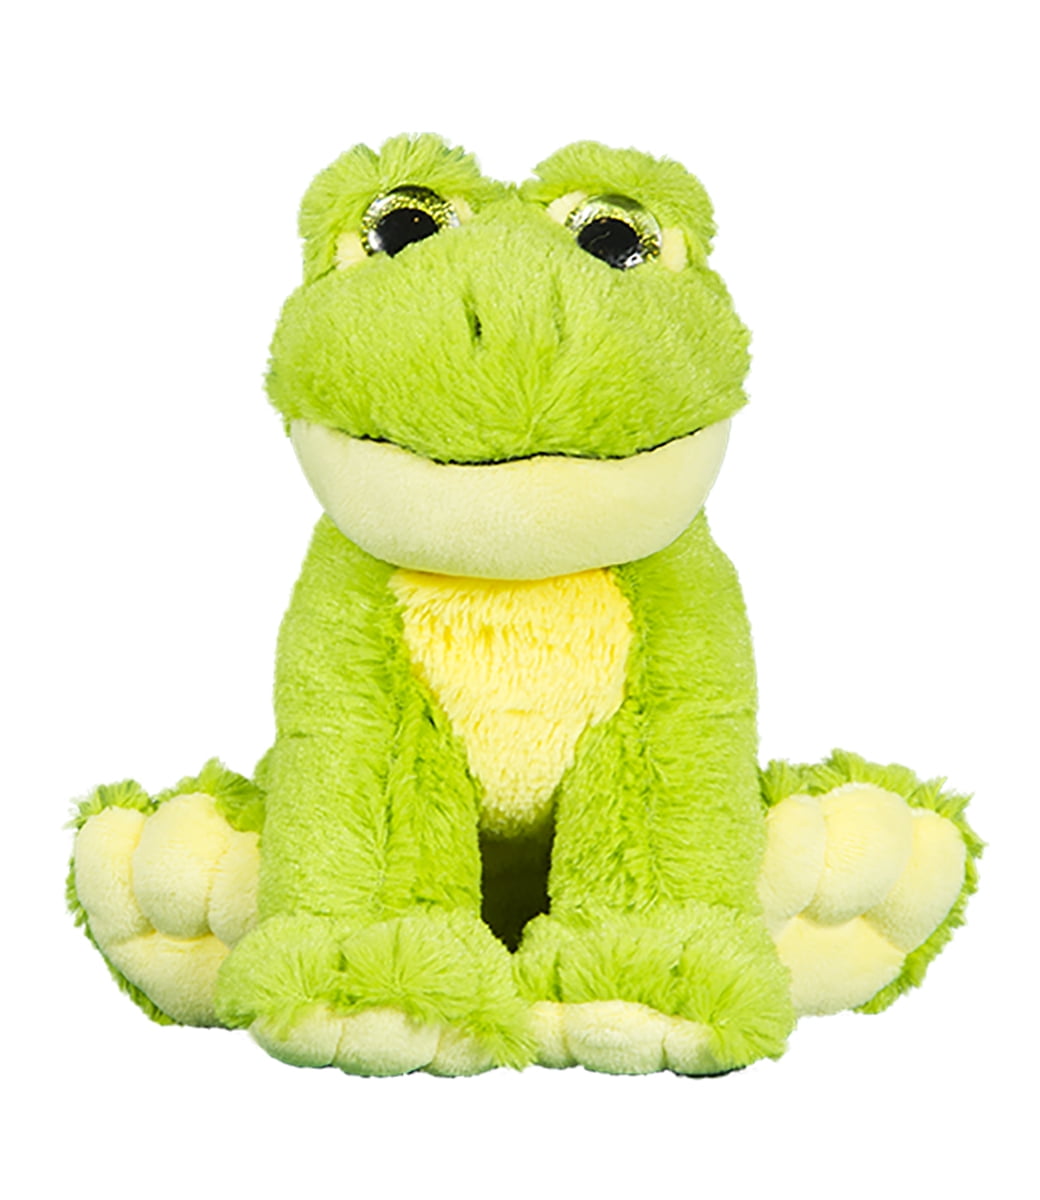 Teddy M Ready To Love In A Few Easy Steps Record Your Own Plush 16 inch Frog 